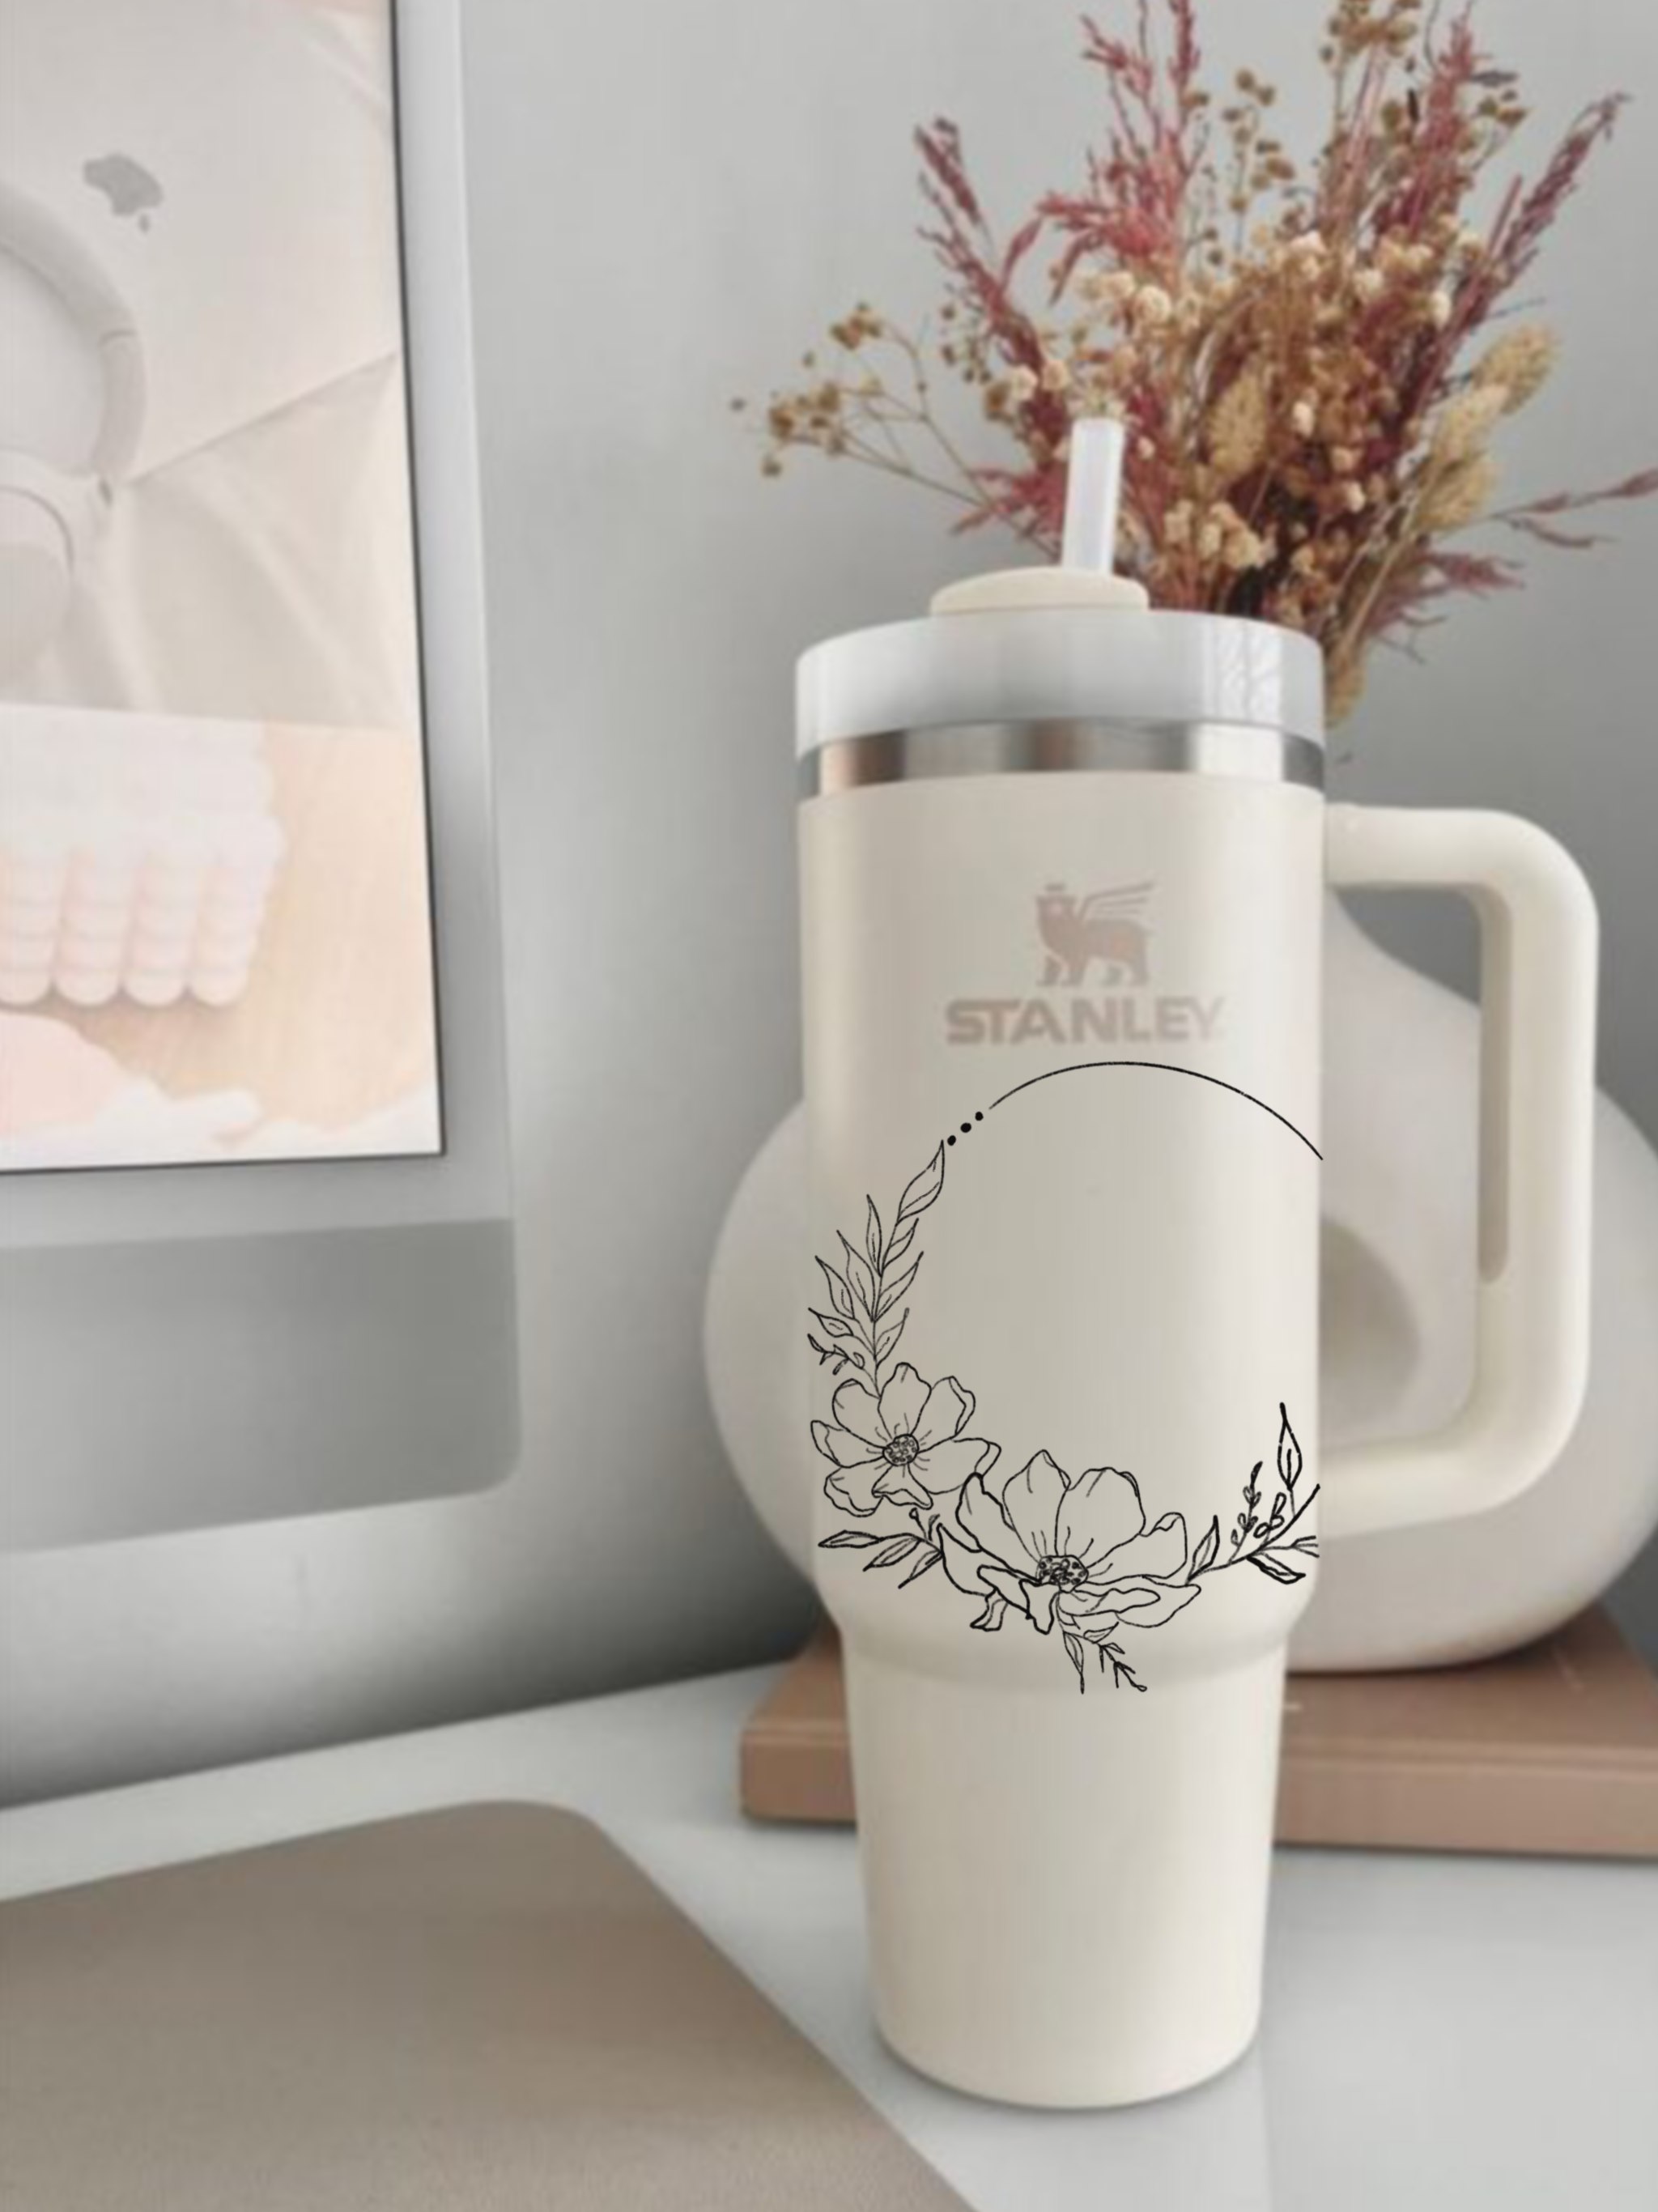 Stanley drinkware is now a status symbol for the wellness-oriented internet trend-chaser but we have failed as a community to educate ourselves.